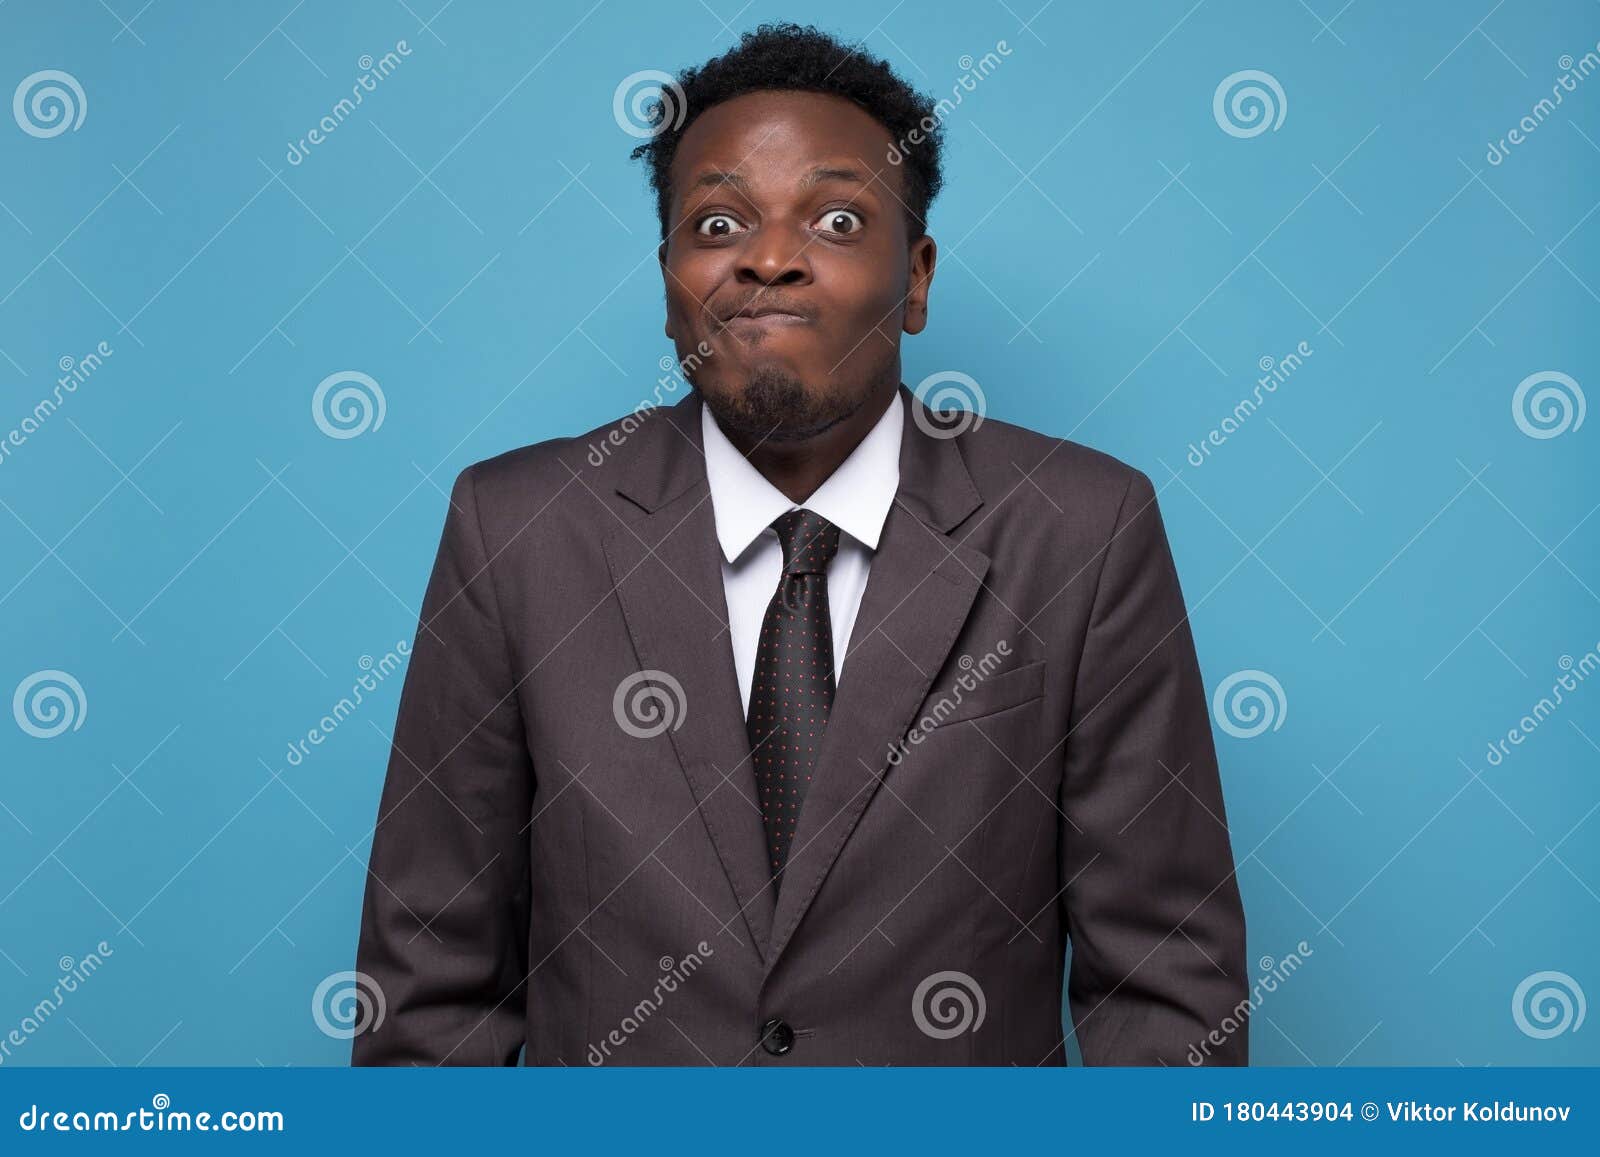 African American Man Holding Breathe Trying To Keep Information in ...